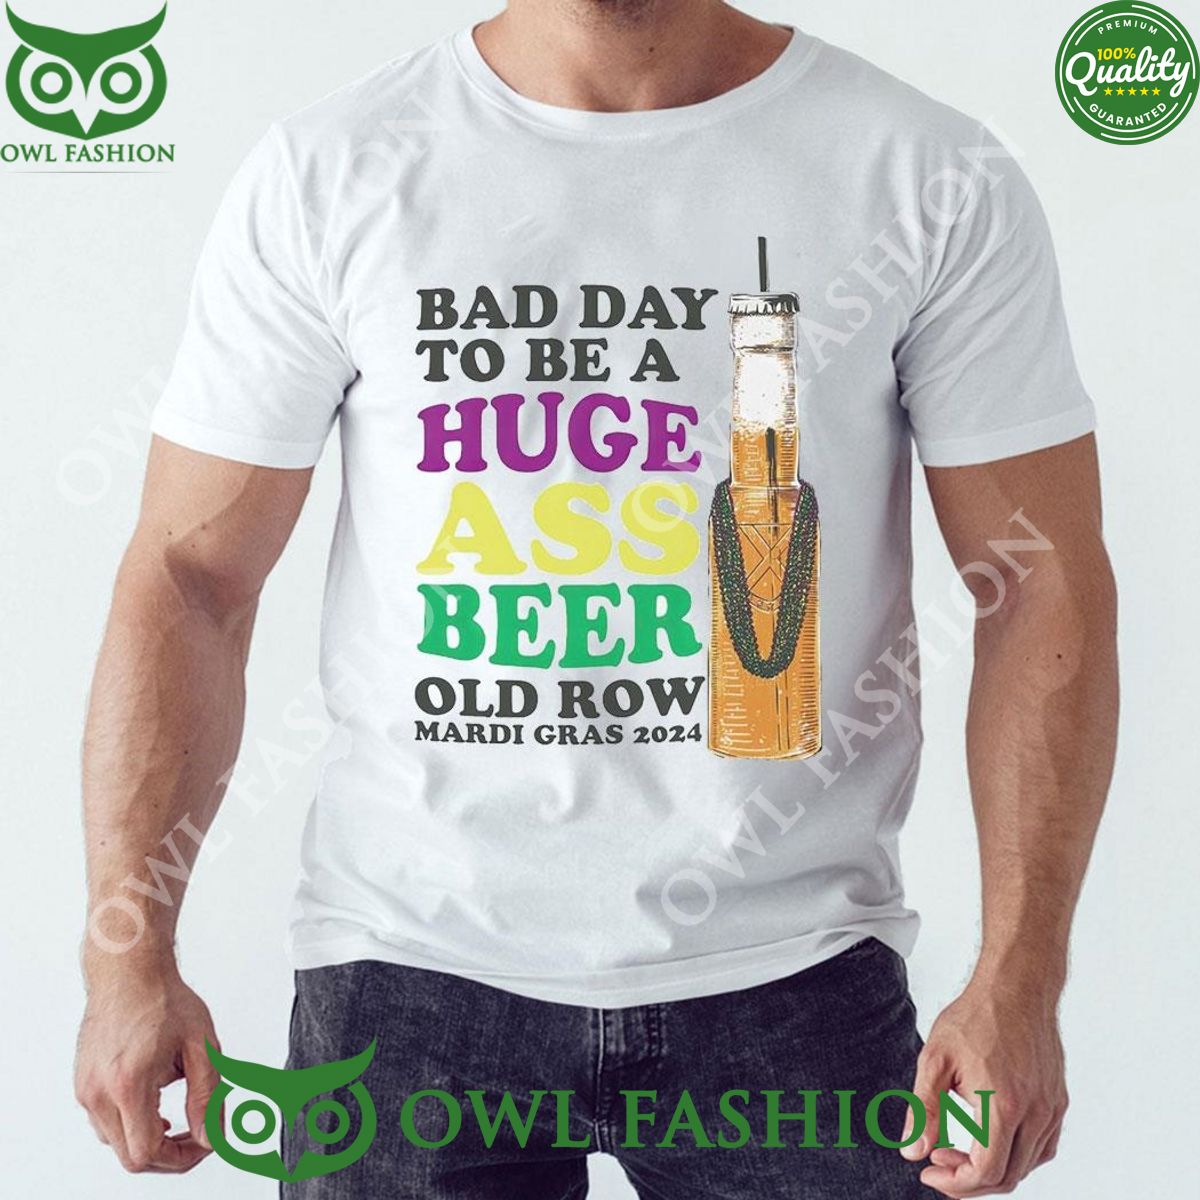 Bad Day To Be A Huge Ass Beer Old Row Mardi Gras 2024 Shirt Super sober